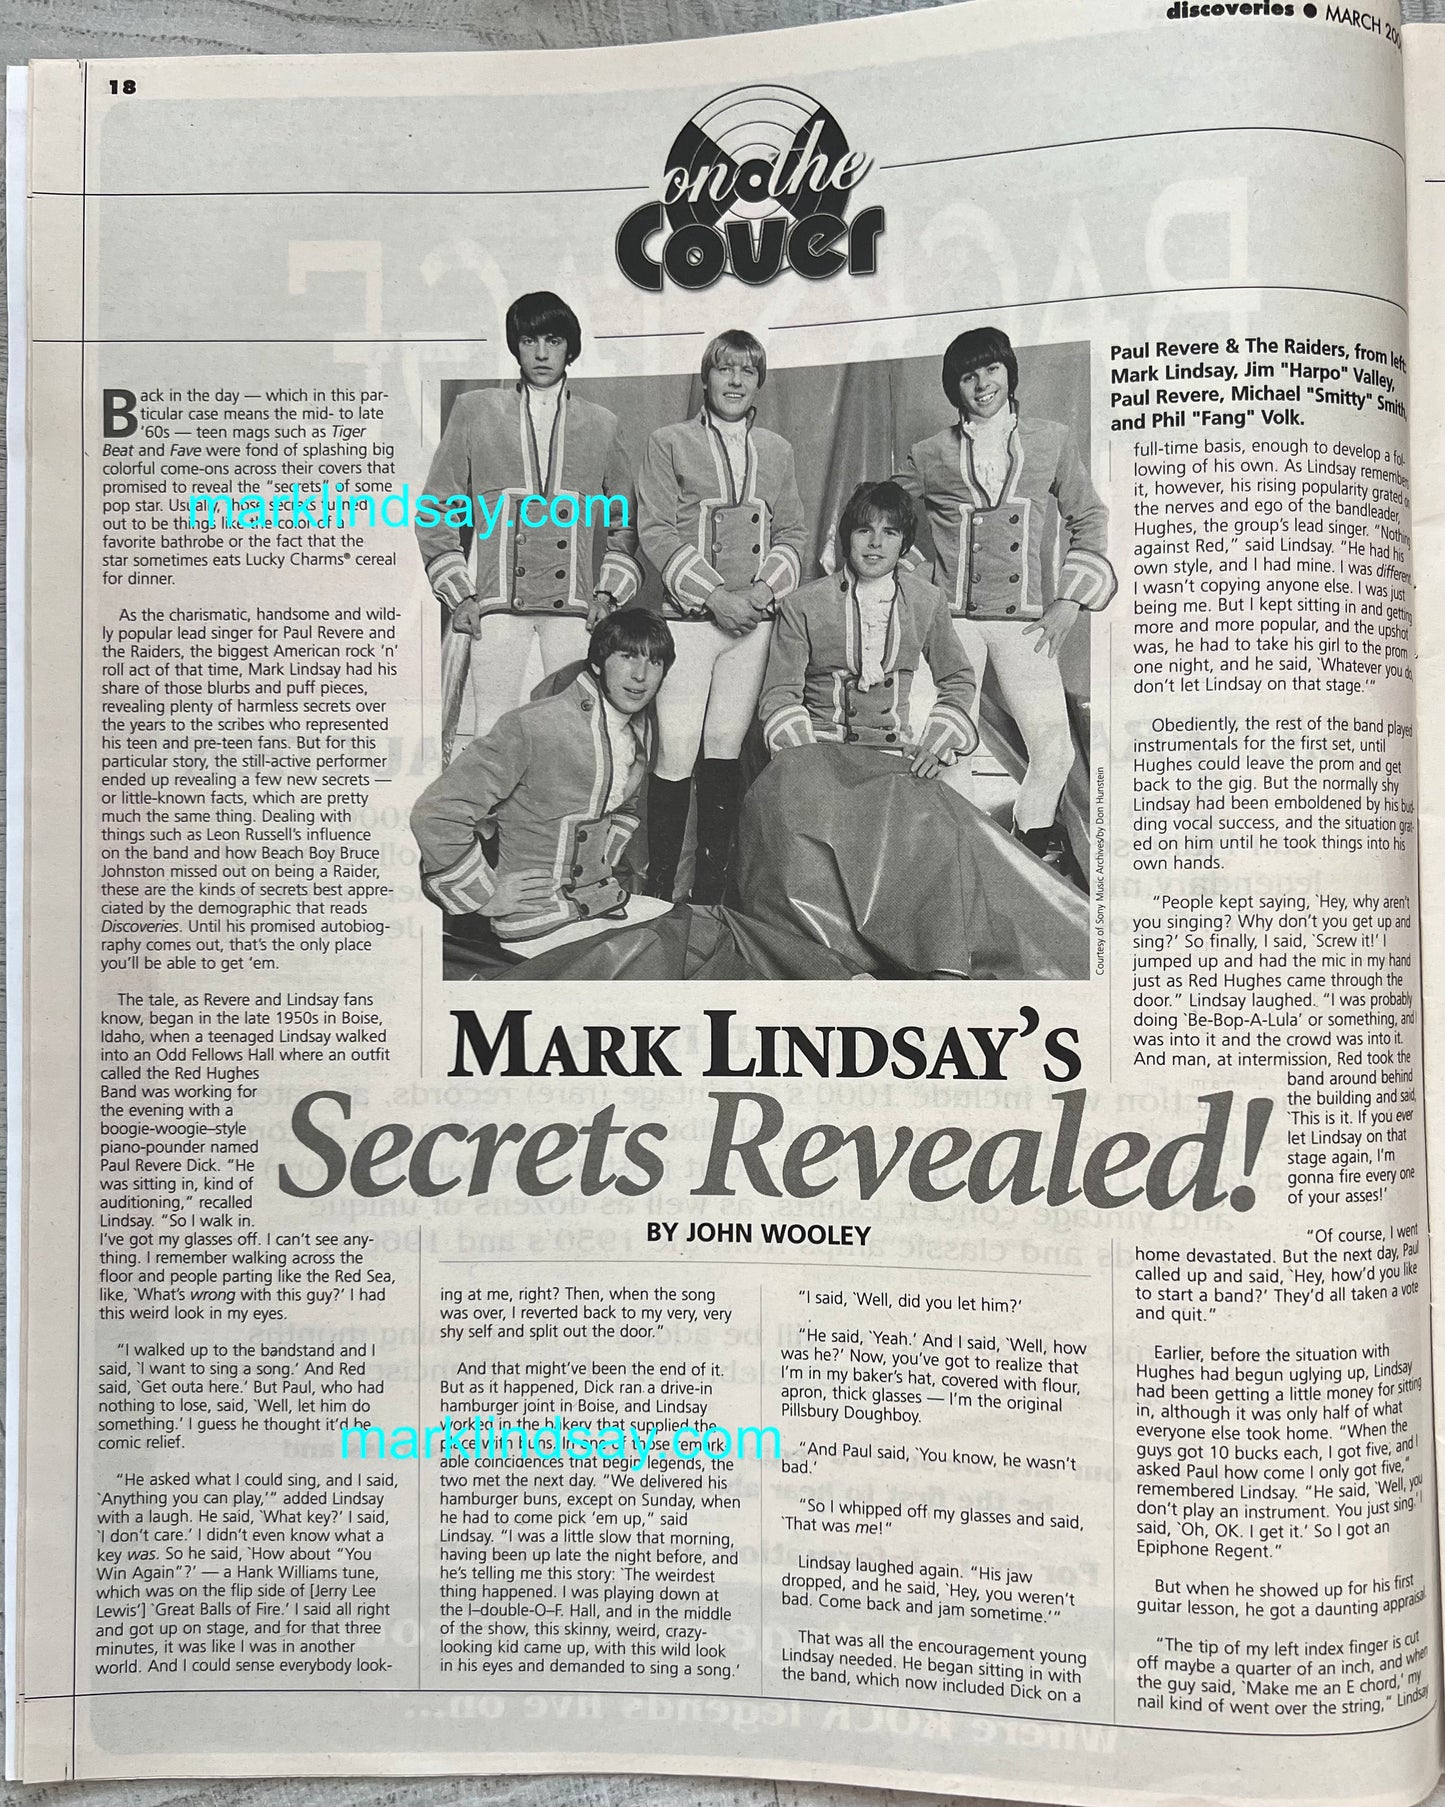 2006 Discoveries Magazine  / 4 Pg ML Interview "Secrets!" - Personally Autographed to YOU by Mark